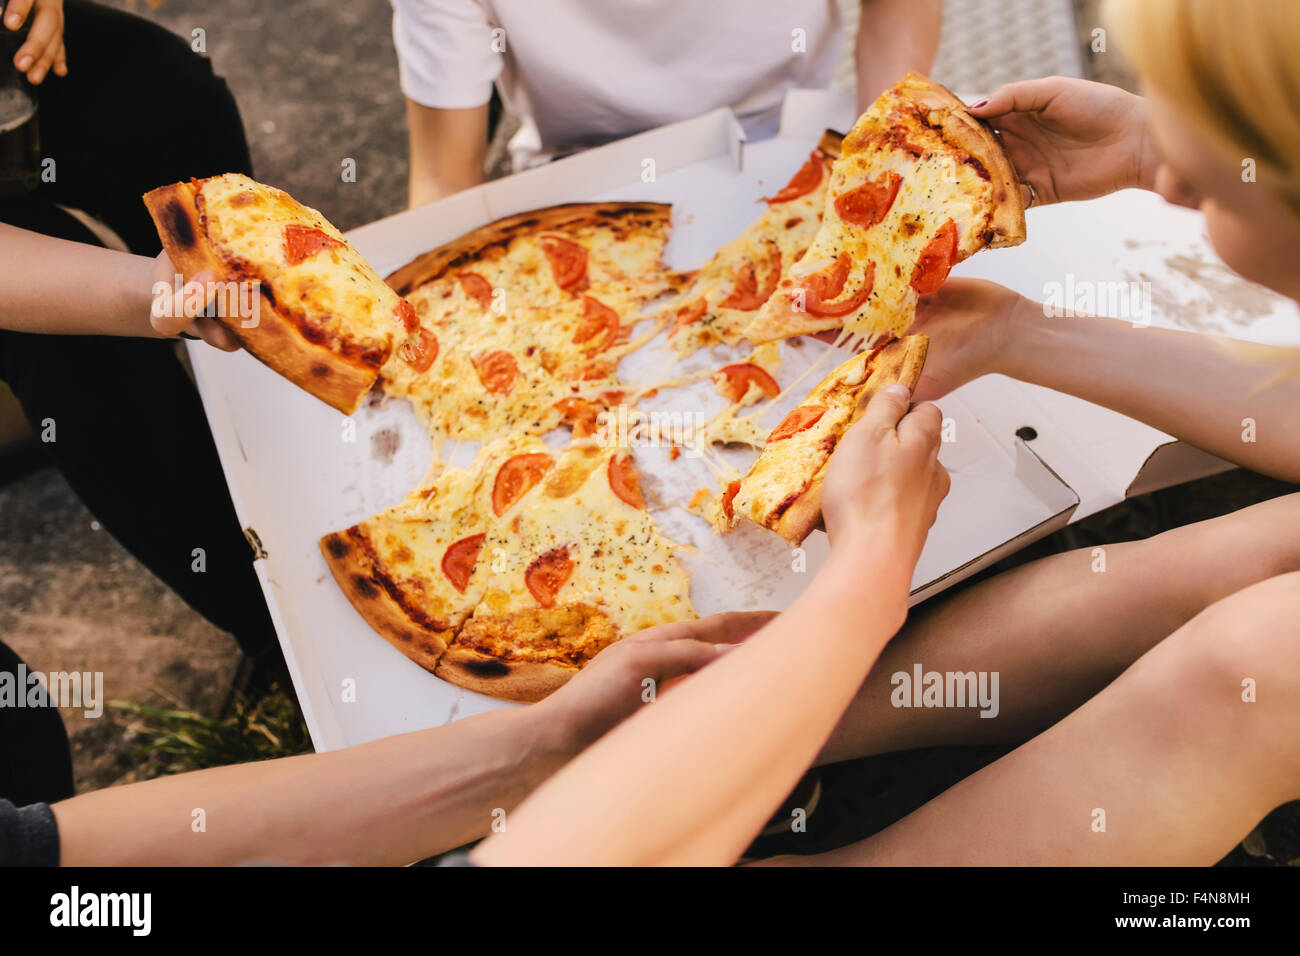 Friends sharing a pizza Stock Photo